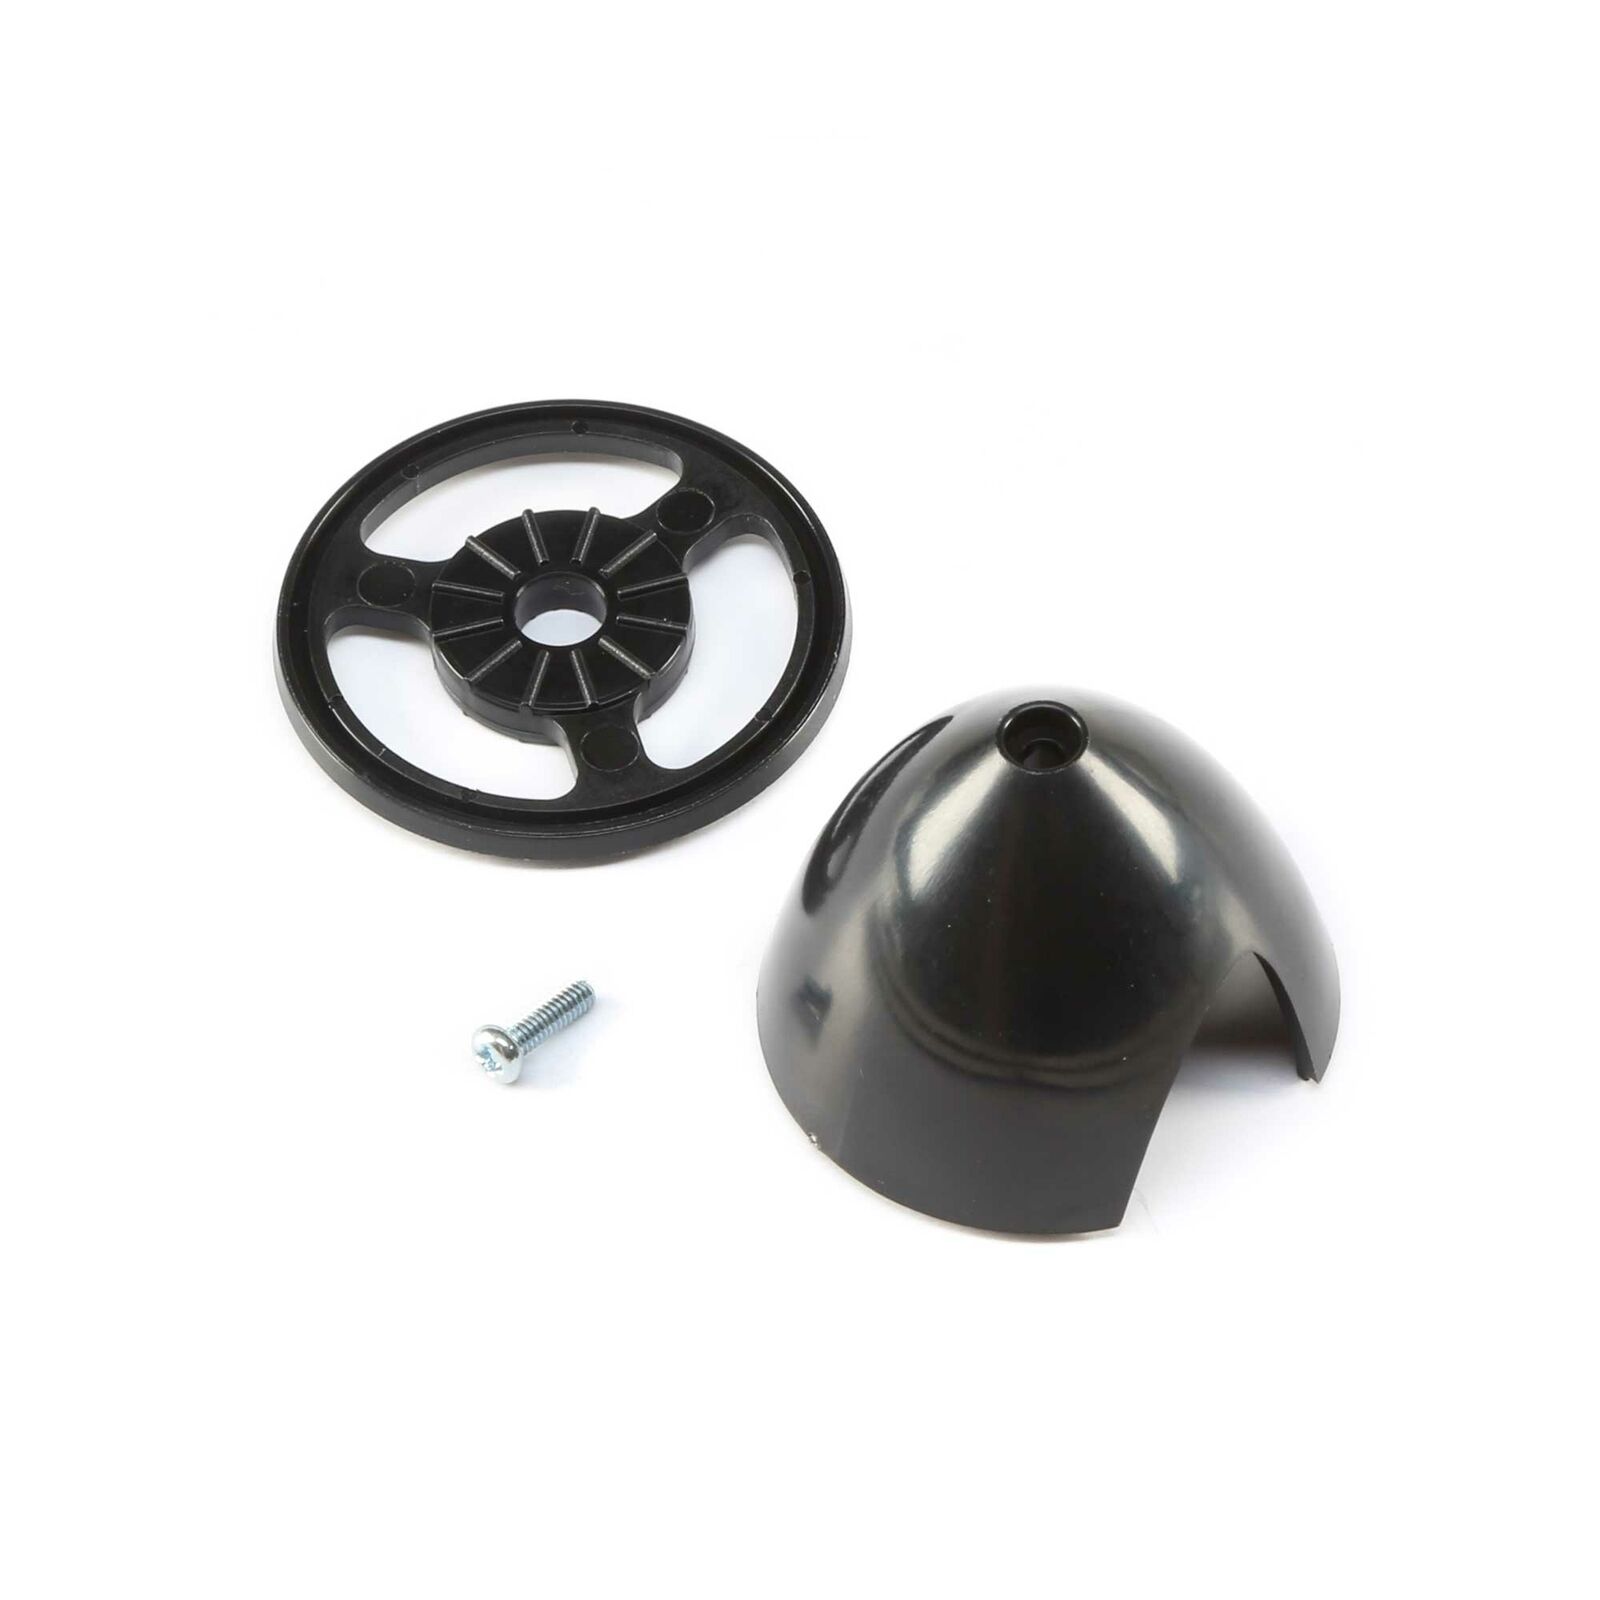 HobbyZone Spinner 40mm Carbon Cub S+ 1.3m HBZ3225 Spinners & Hub Nuts